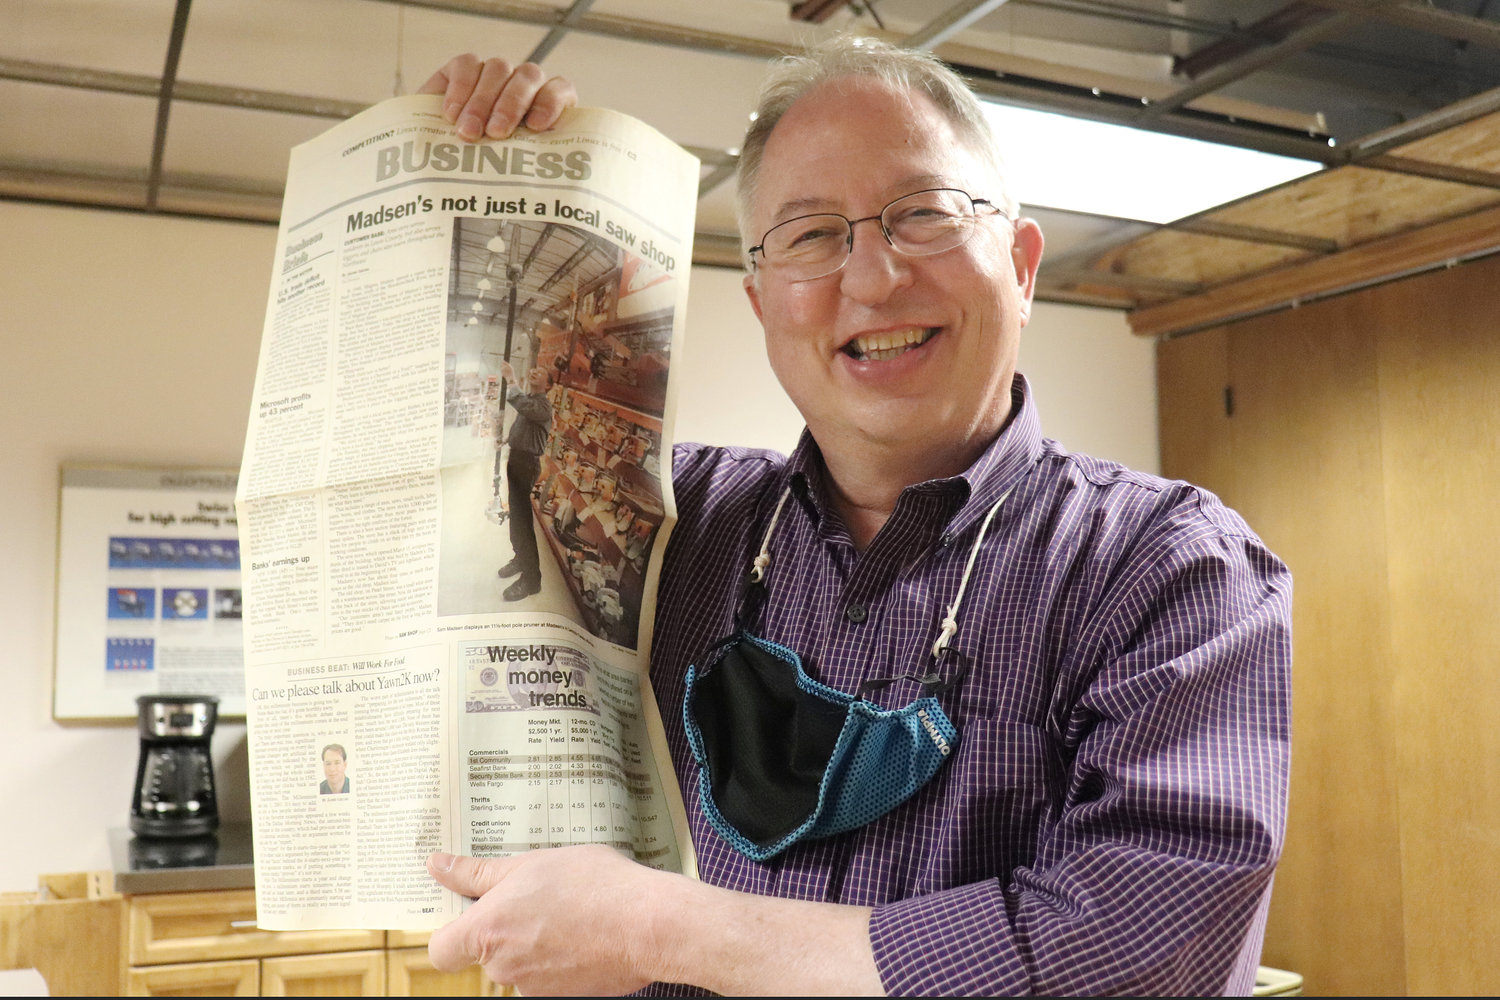 Sam Madsen holds up an old copy of The Chronicle that included coverage of Madsen’s Shop & Supply.